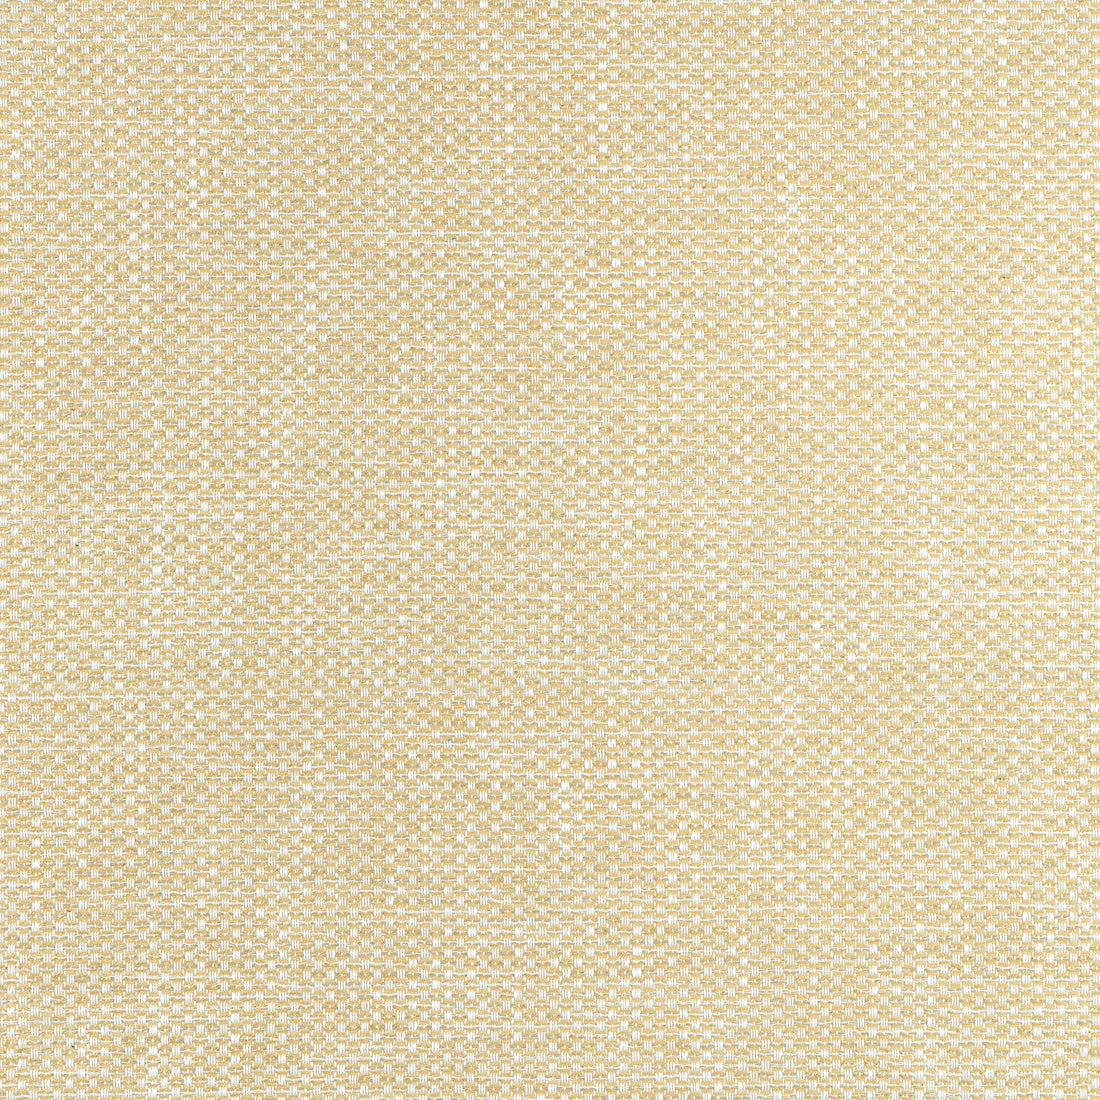 Cascade fabric in straw color - pattern number W75262 - by Thibaut in the Elements collection